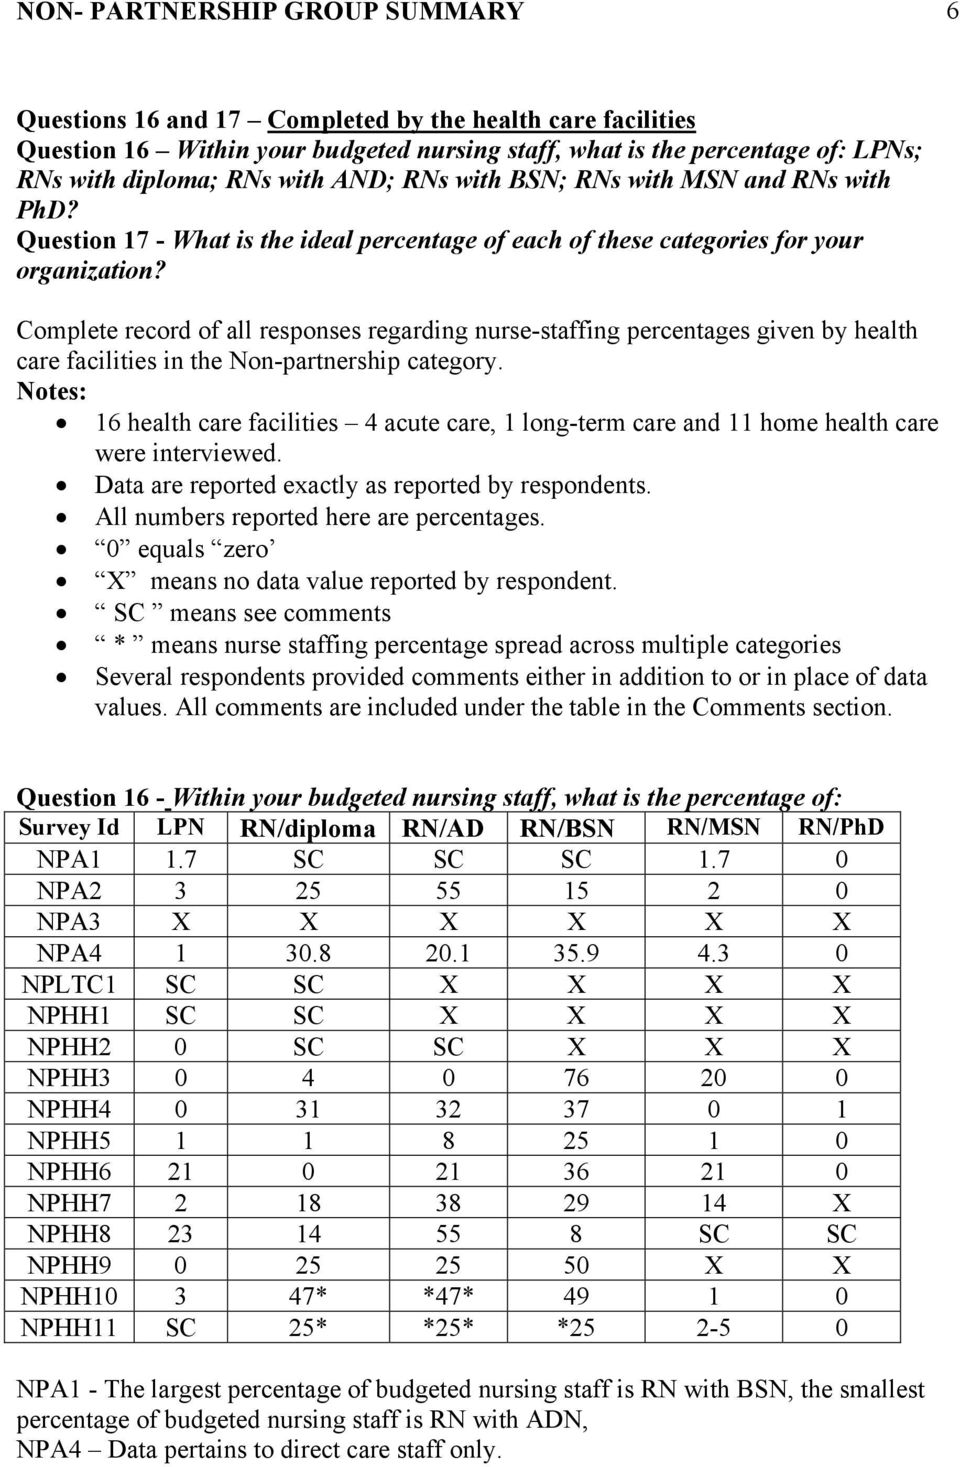 Complete record of all responses regarding nurse-staffing percentages given by health care facilities in the Non-partnership category.